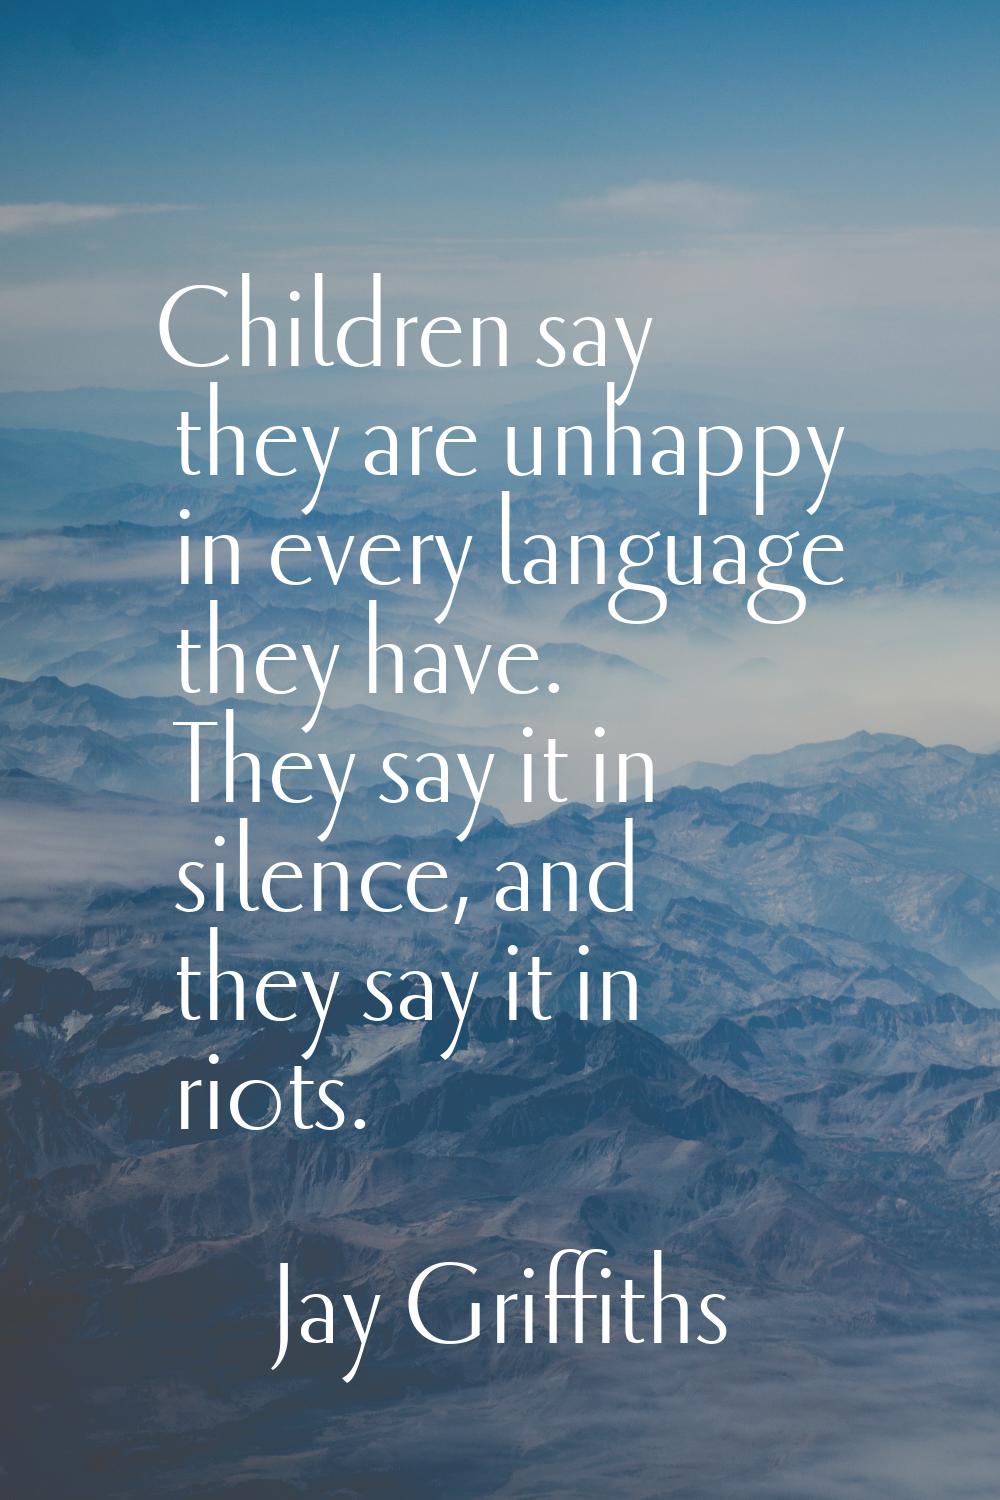 Children say they are unhappy in every language they have. They say it in silence, and they say it 